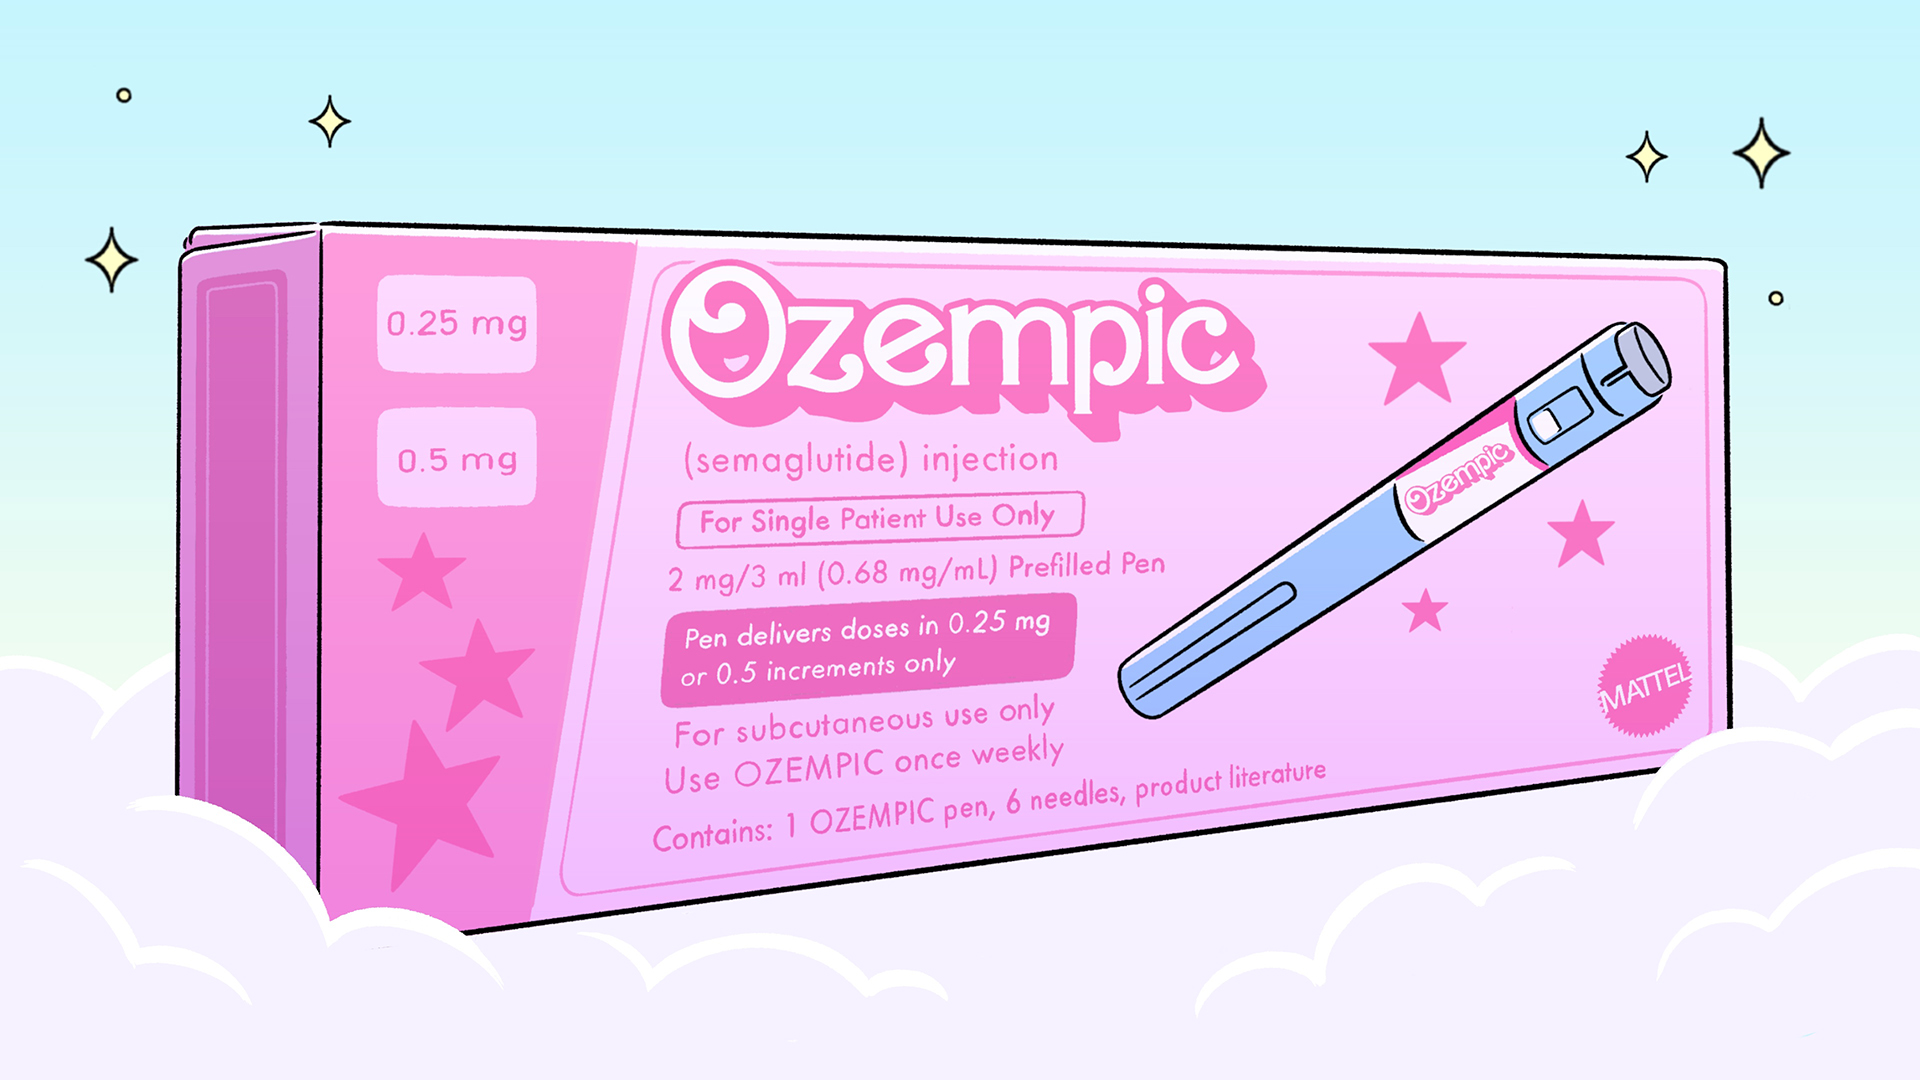 An illustration shows a box of Ozempic with Barbie branding emerging from a cloud with sparkles.